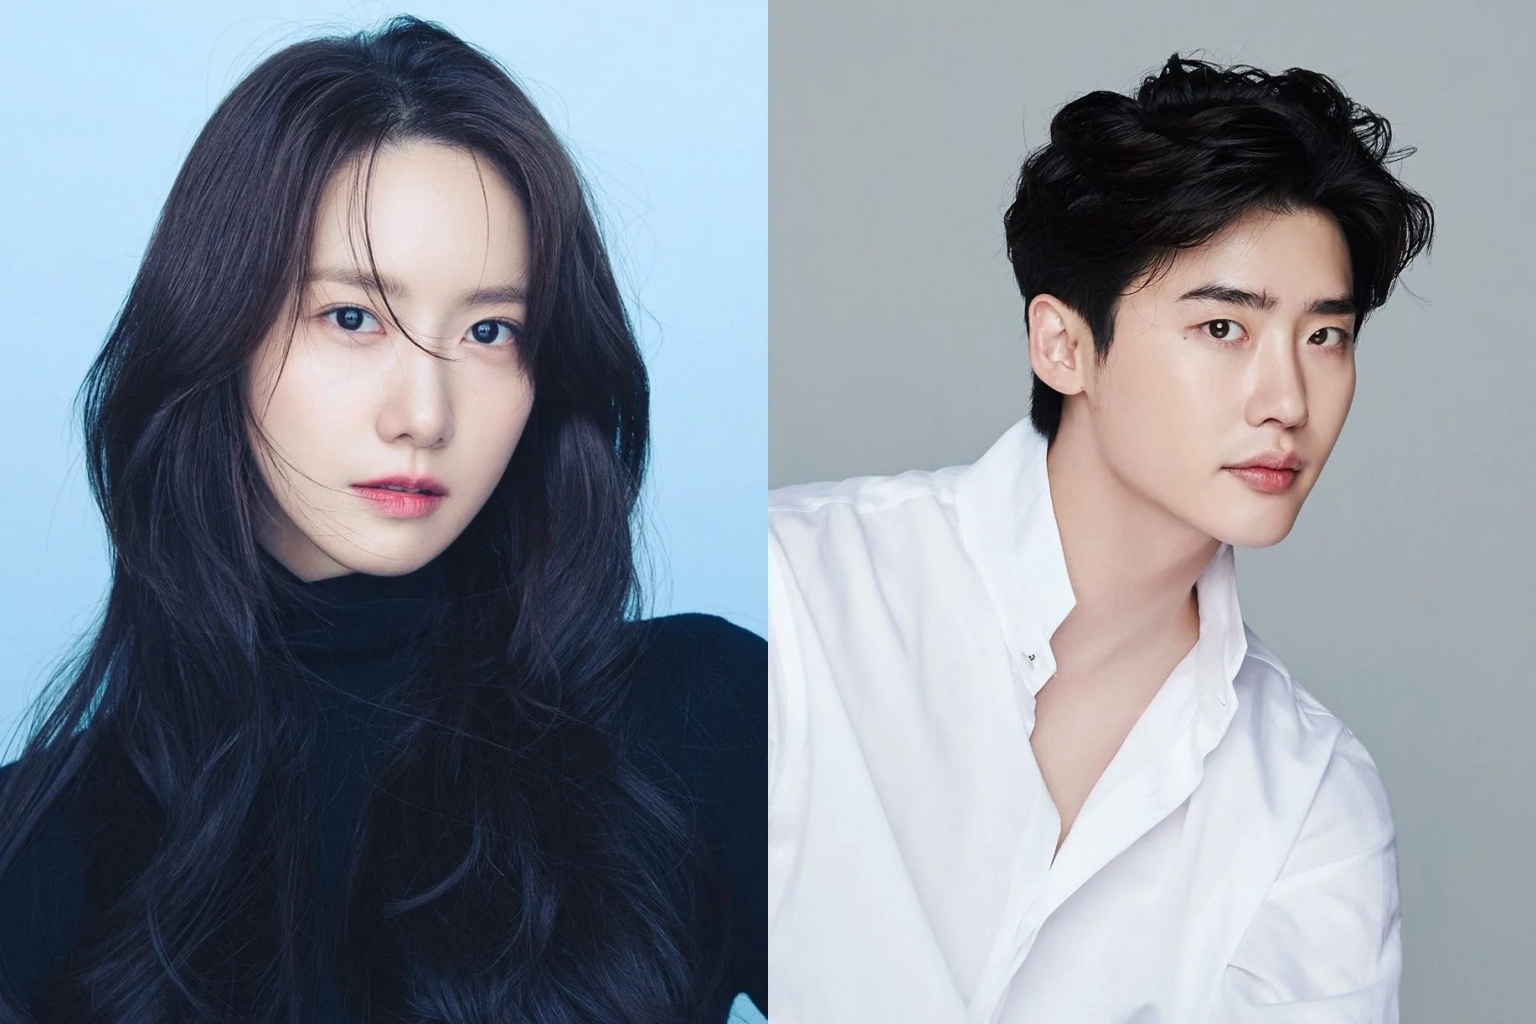 Watch: Lee Jong Suk and YoonA go to the closures for one another in new